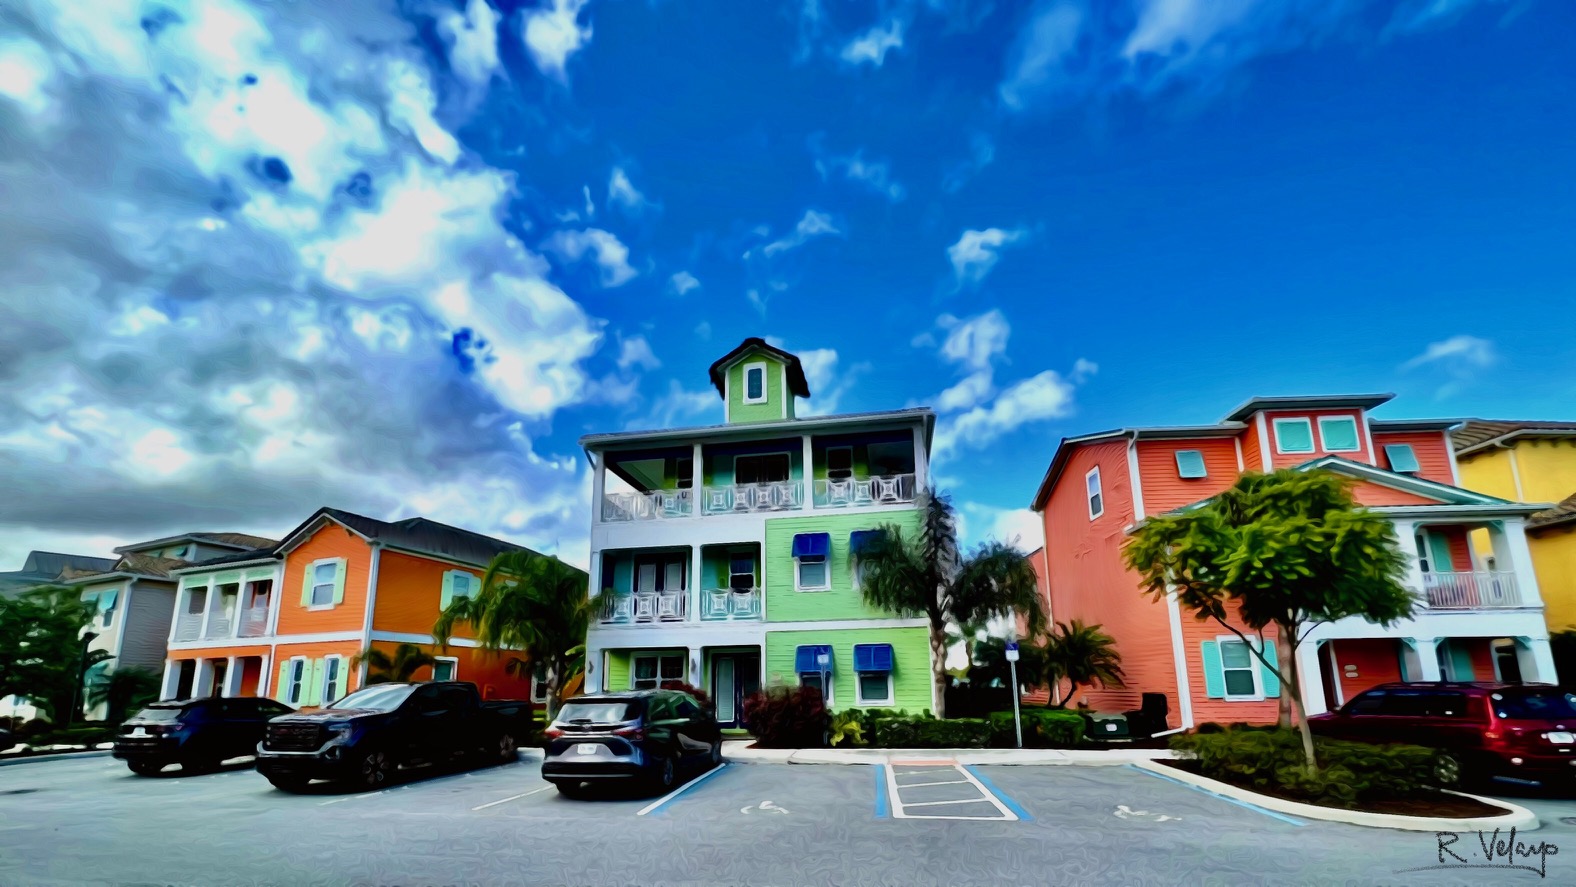 "COLORFUL ROW OF COTTAGES AT MARGARITAVILLE" [Created: 12/23/2021]